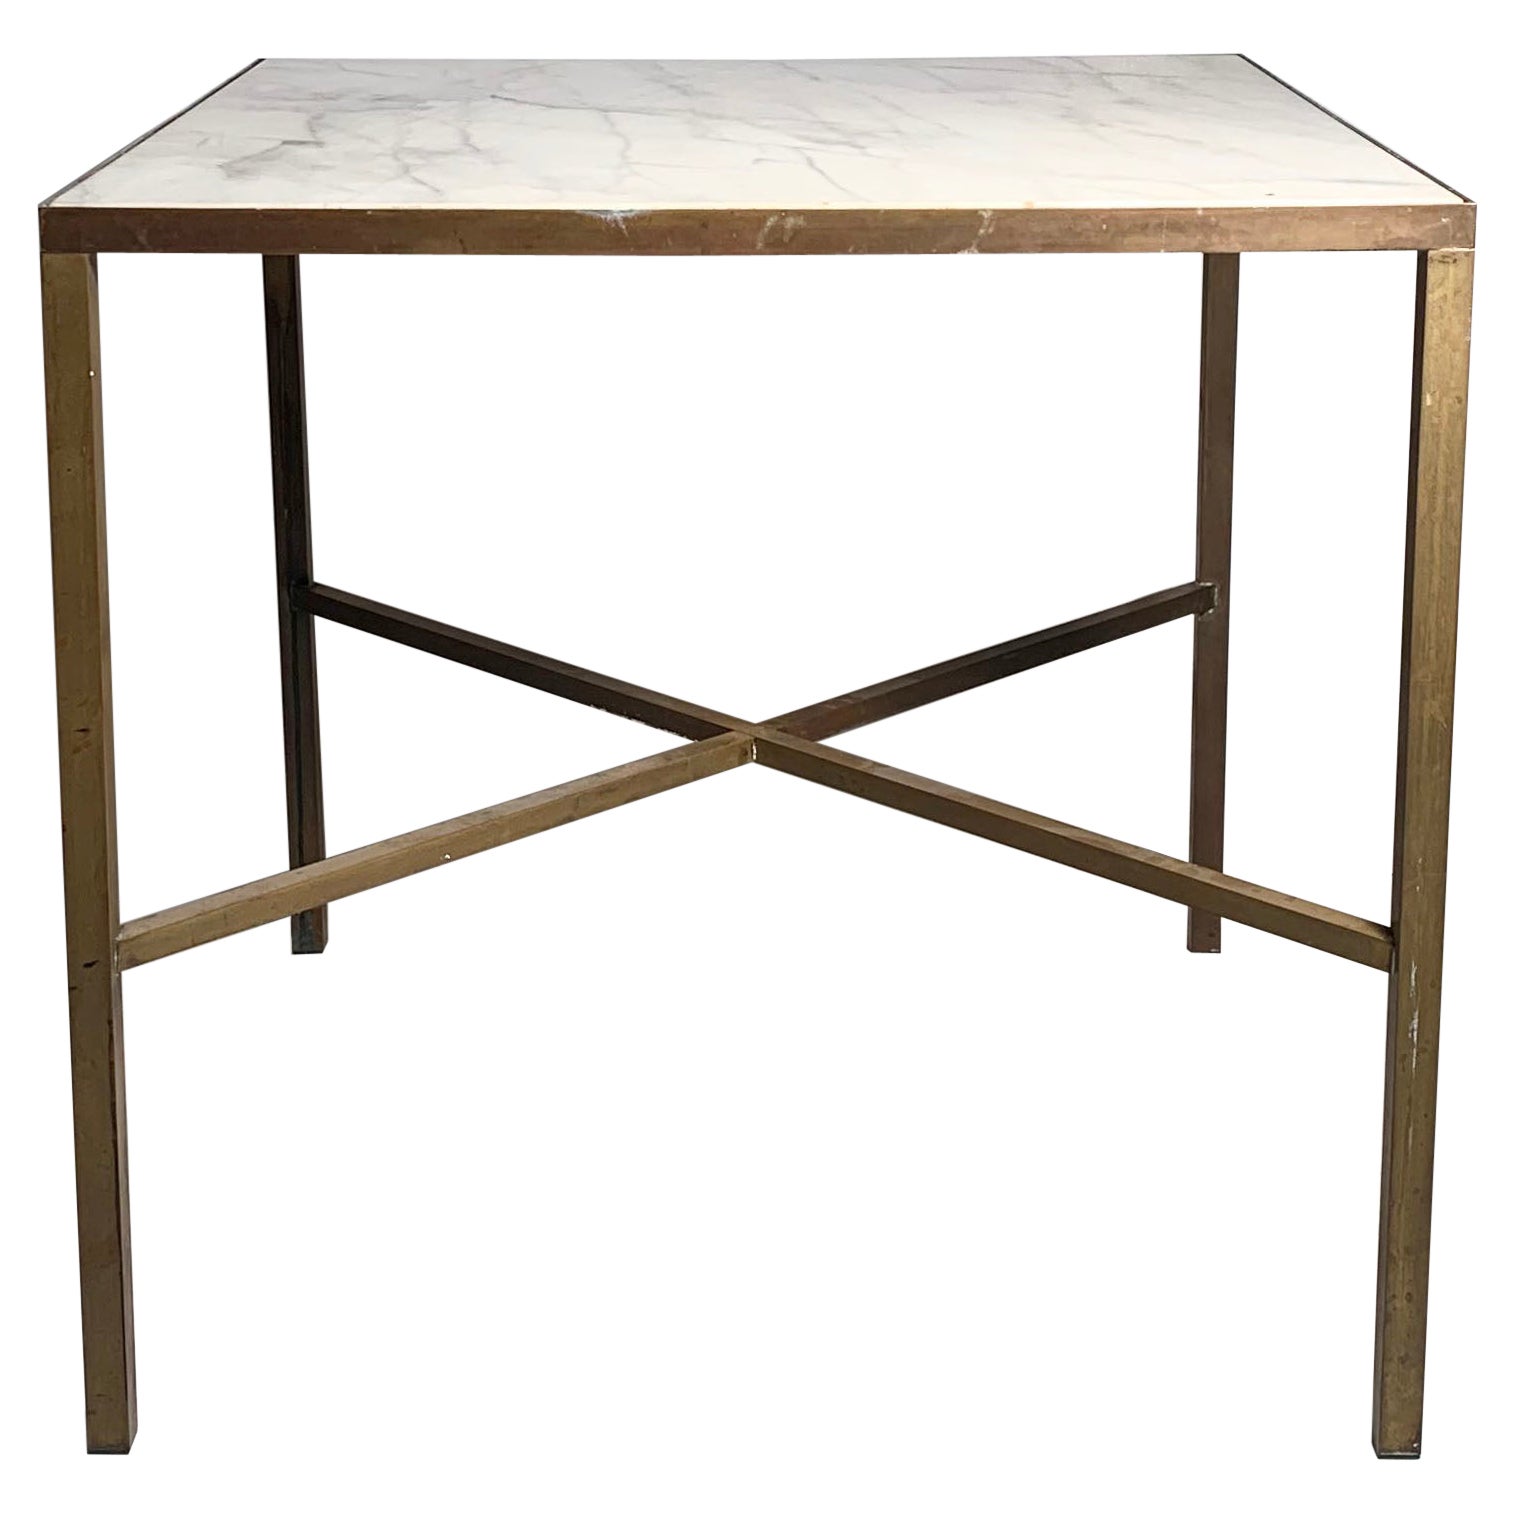 A Rare Paul McCobb Brass and Marble Dinette Table